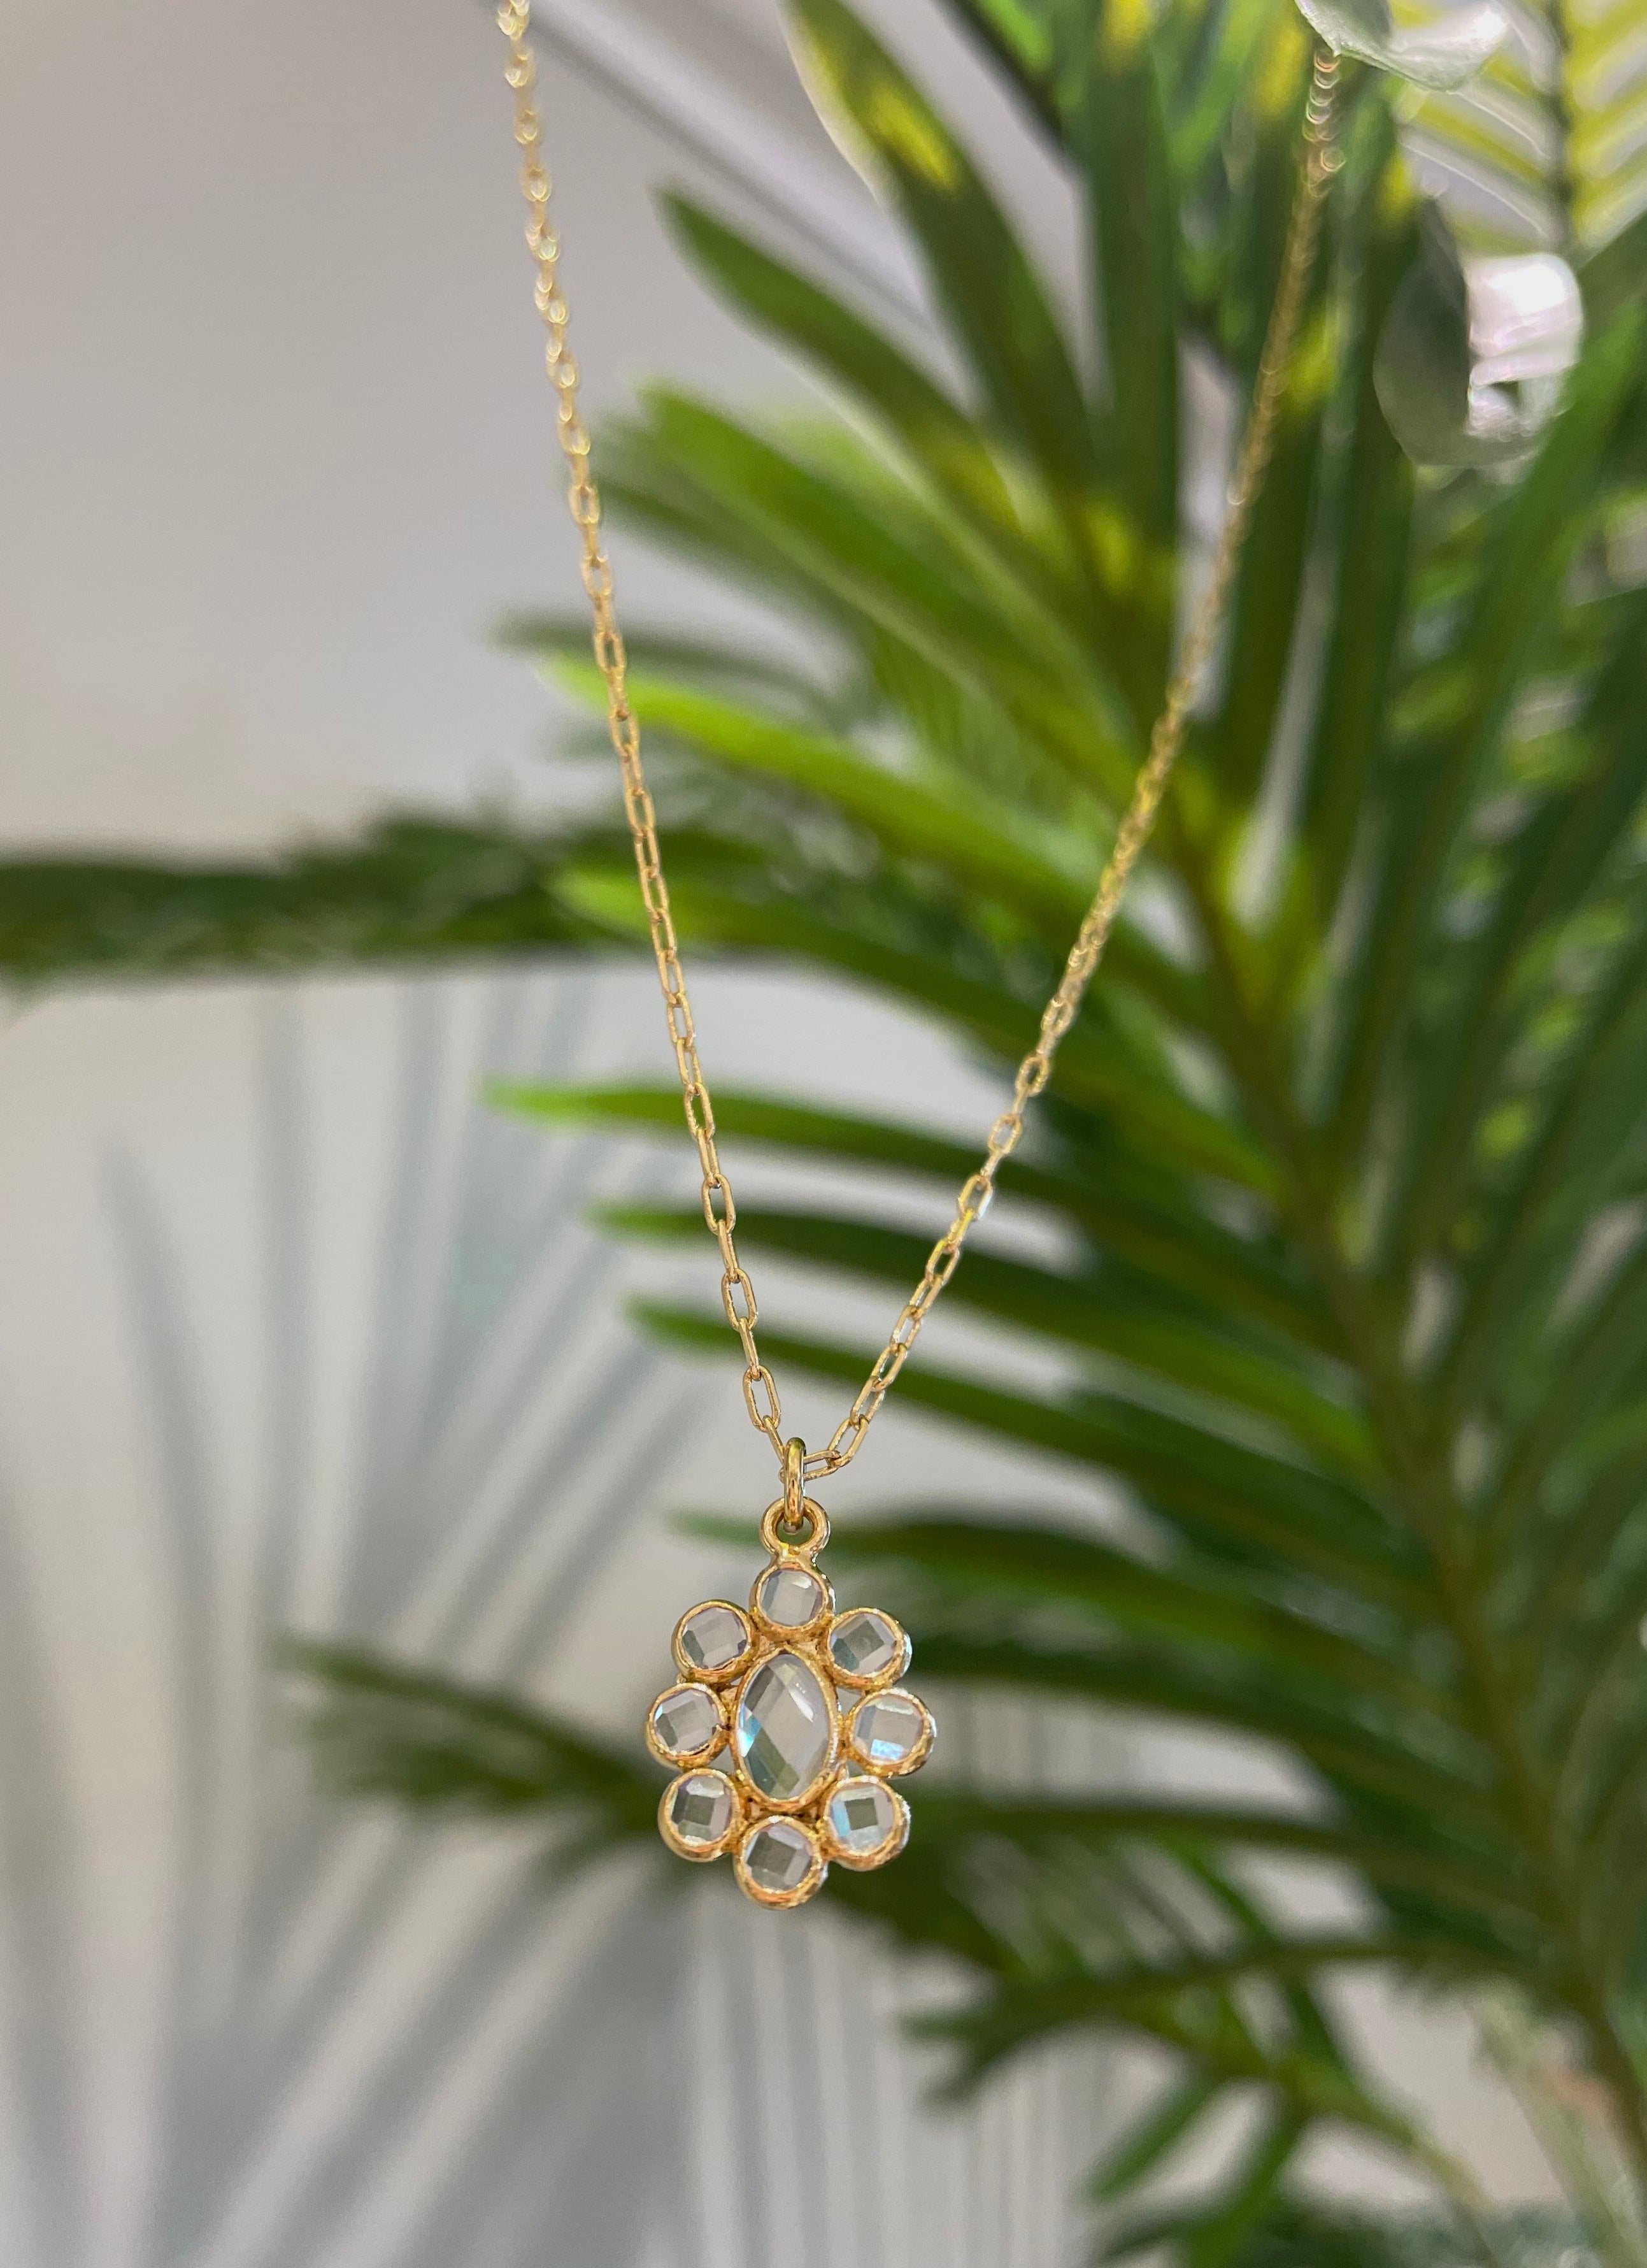 18k gold plated flower short necklace with cubic zirconia flower pendant